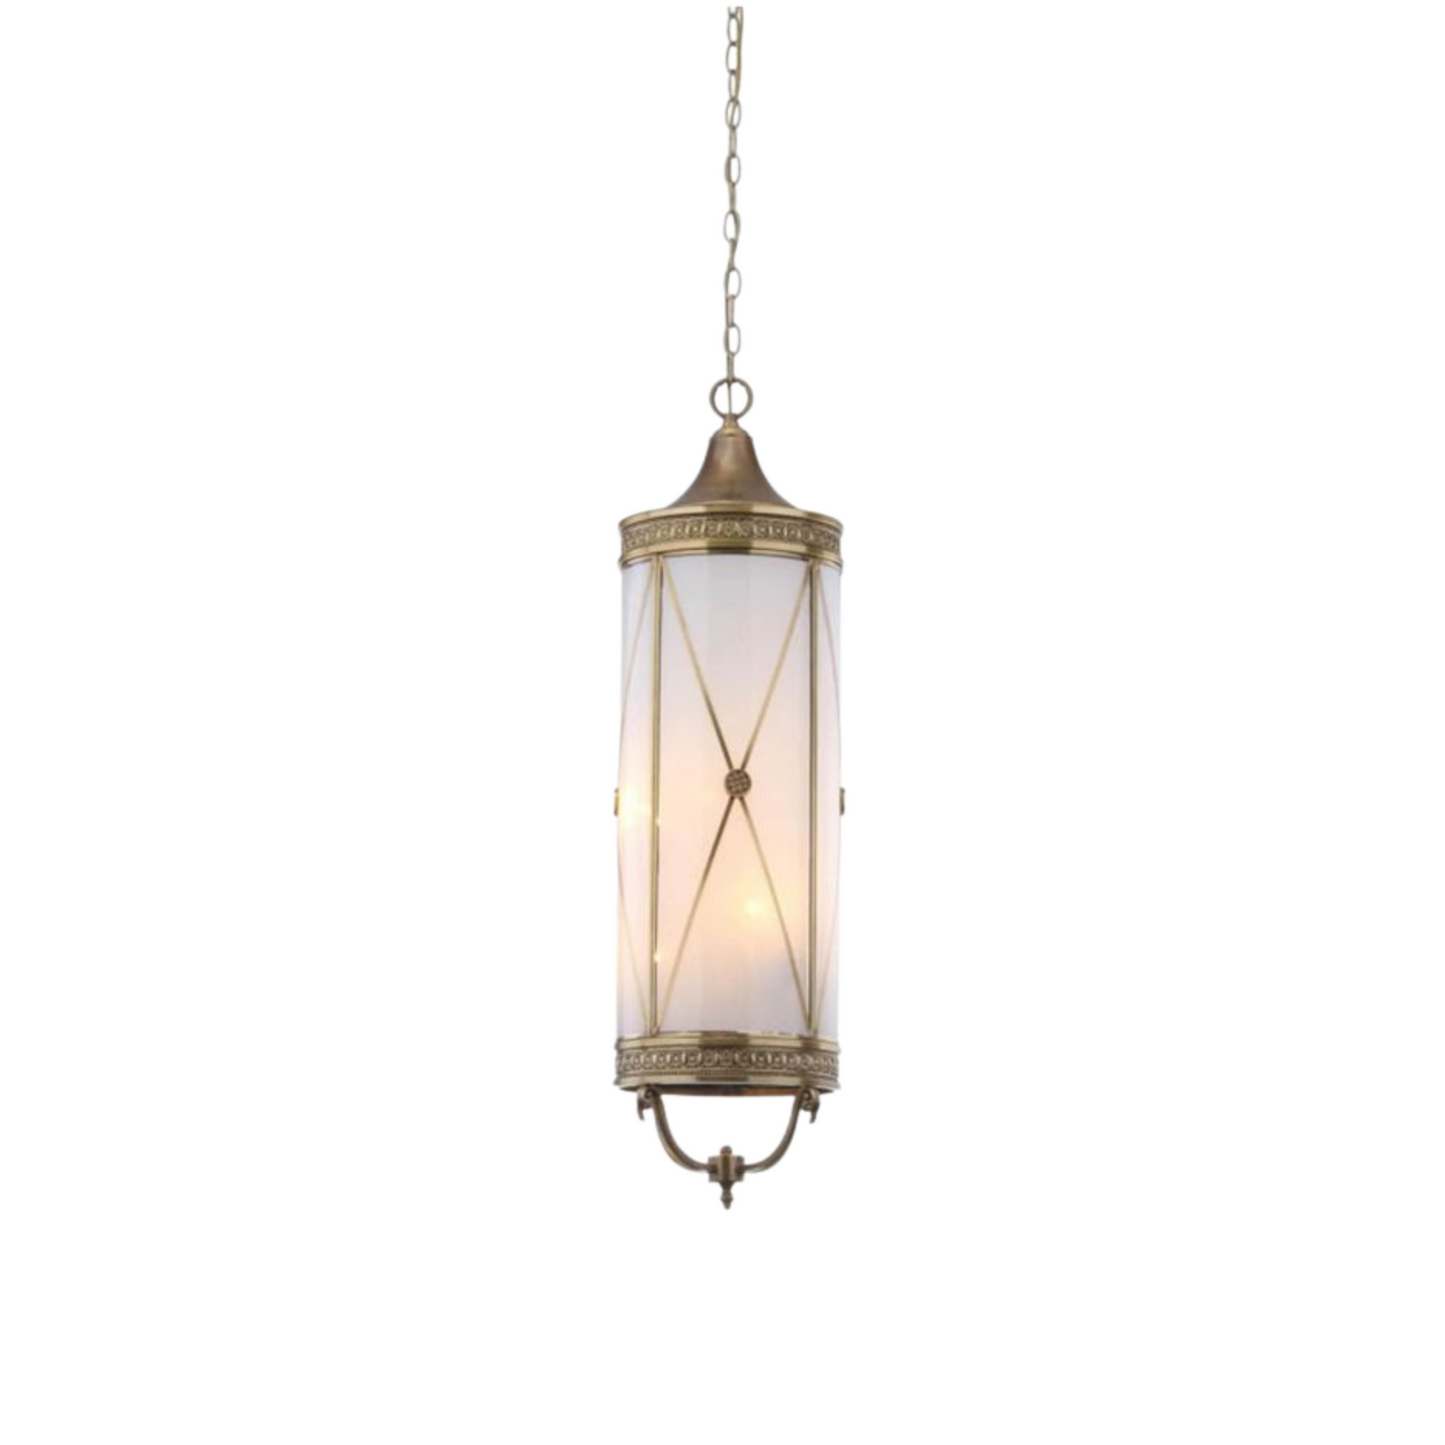 Darby Brass Large Hanging Pendant Lighting with Off-White Enclosed Shade